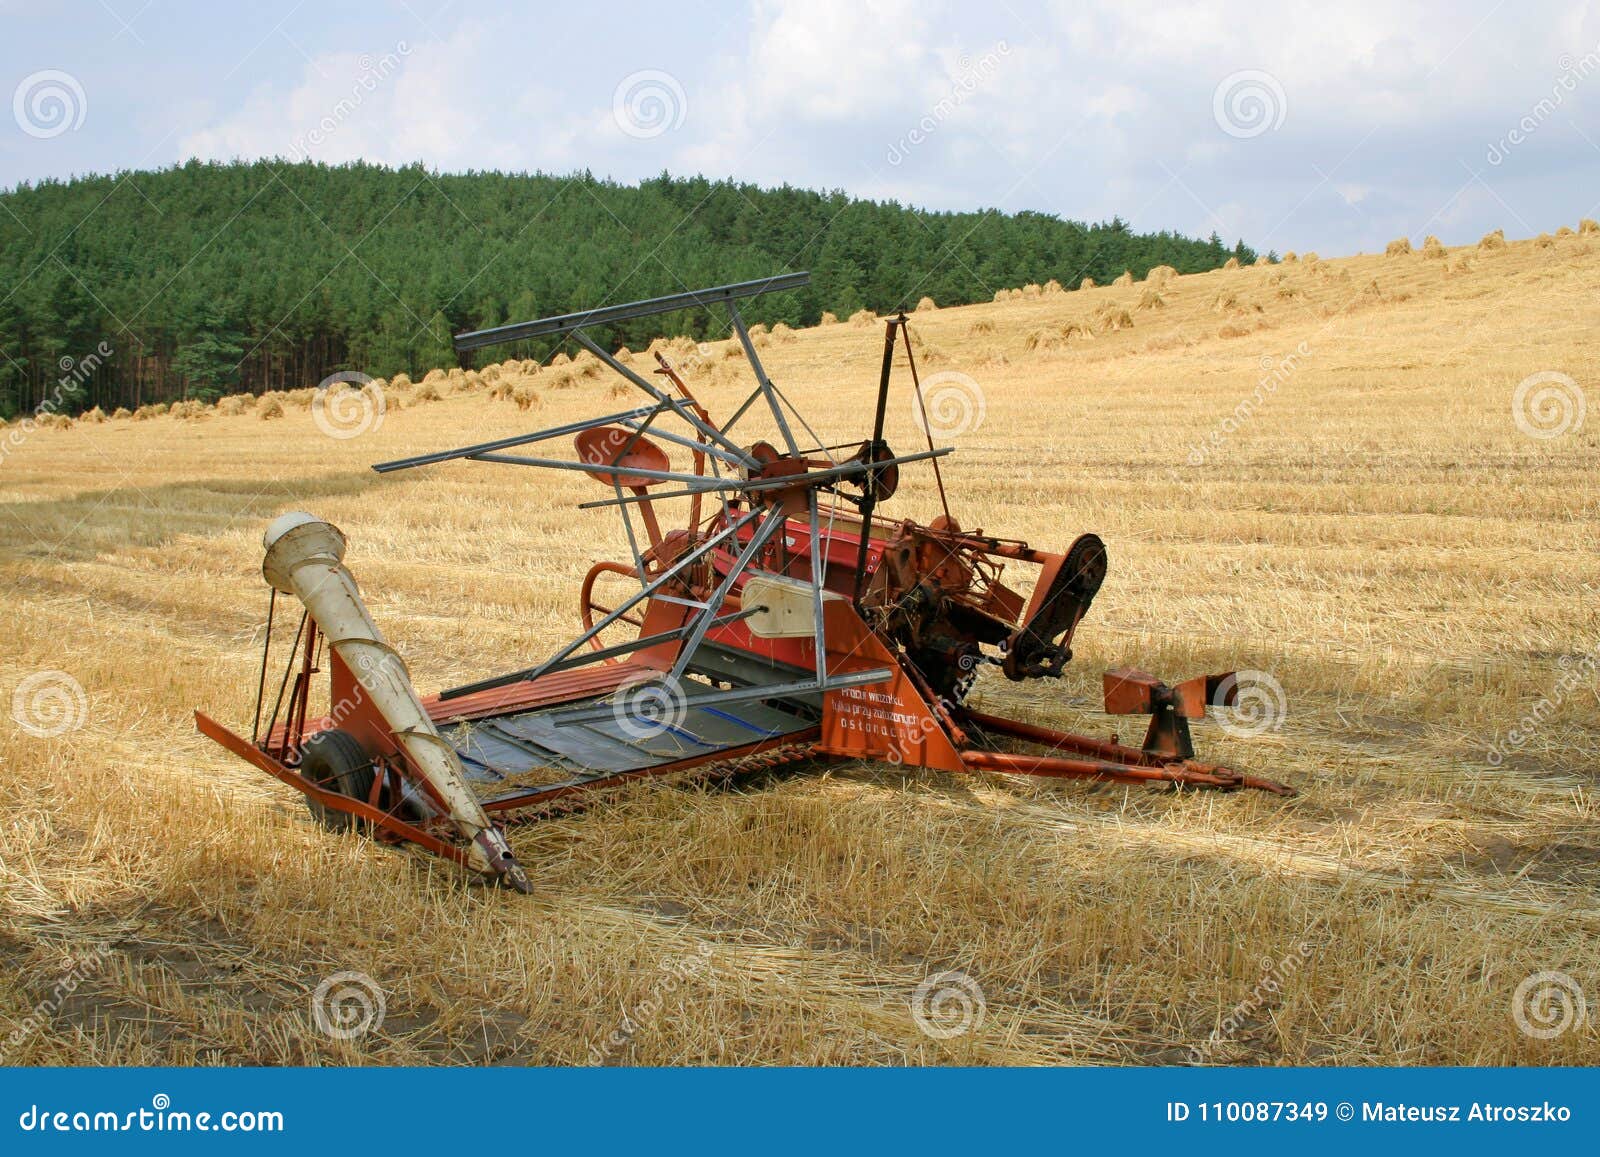 old hay rake reaper-binder - rustic, oldfashioned farm equipment, used for field works during harvest season.